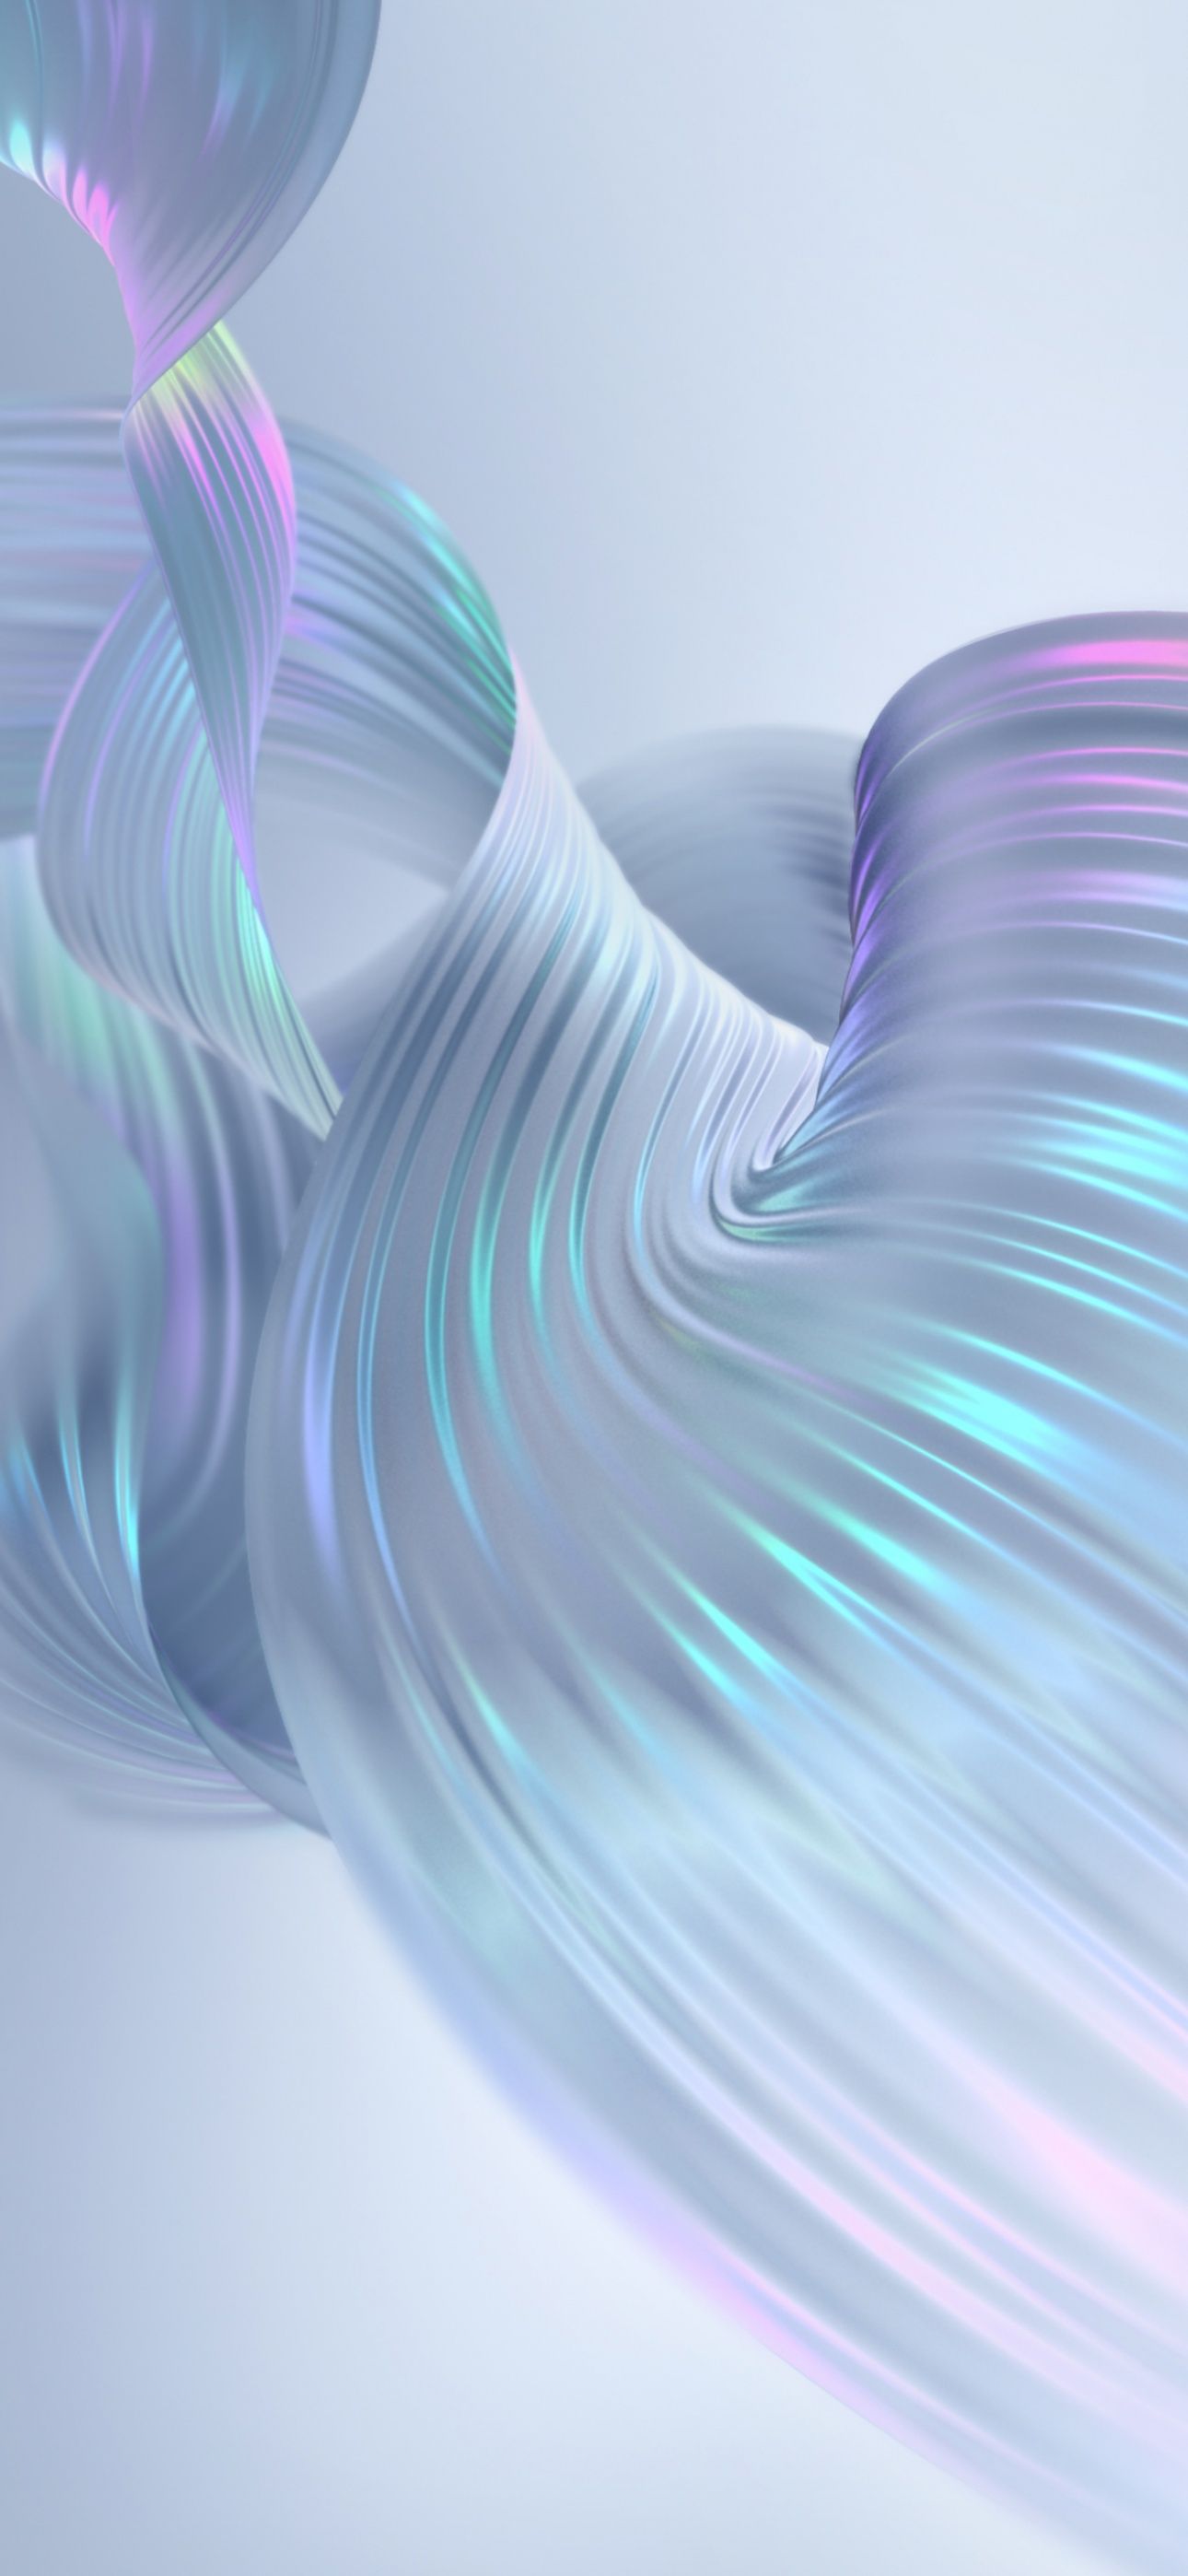 An abstract image of flowing waves in pastel colors - Wings